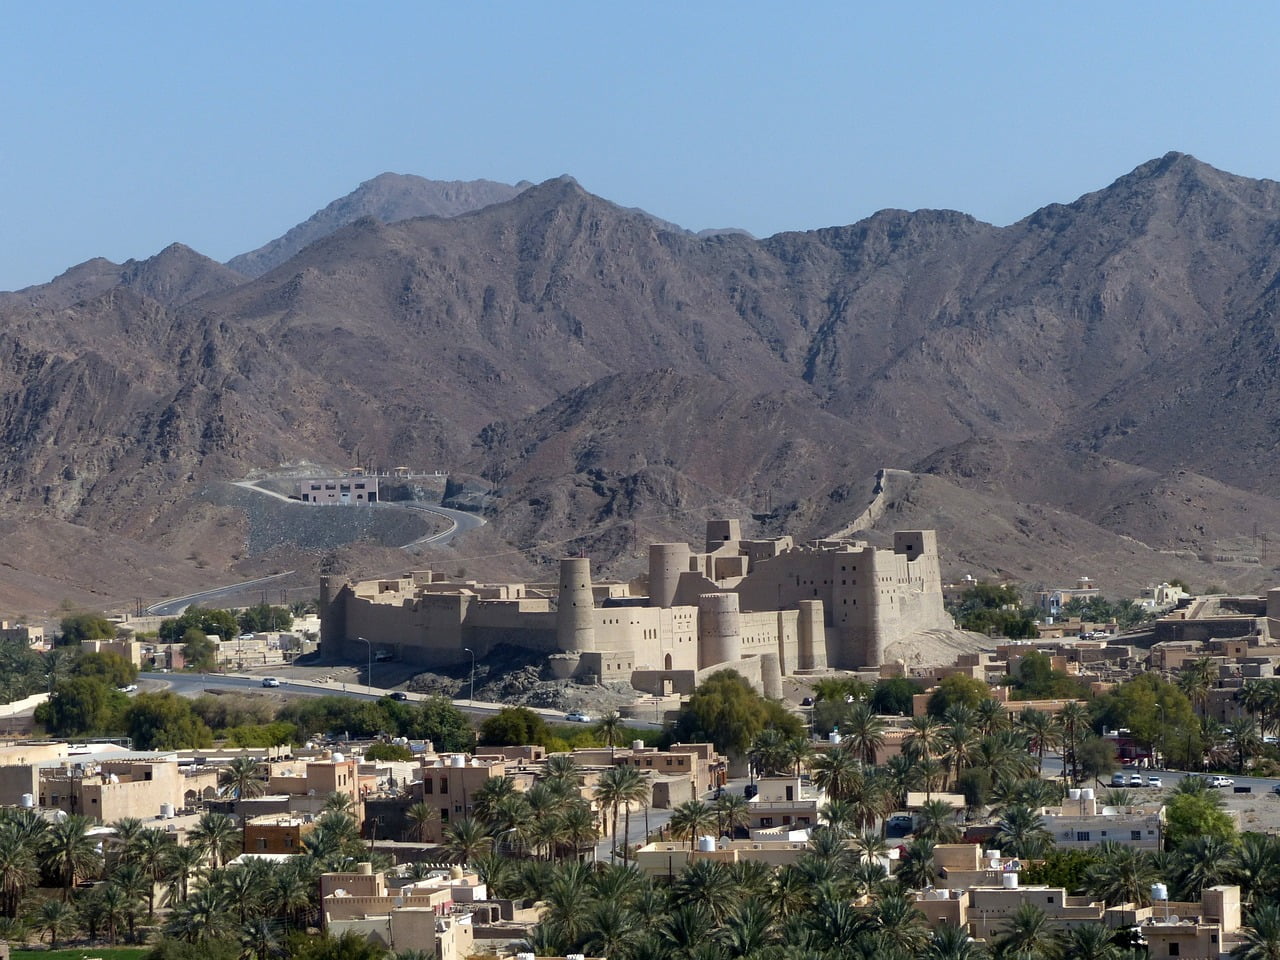 An ancient fortress stands prominently in front of a rugged mountain range, overlooking a town with low-rise buildings and palm trees.